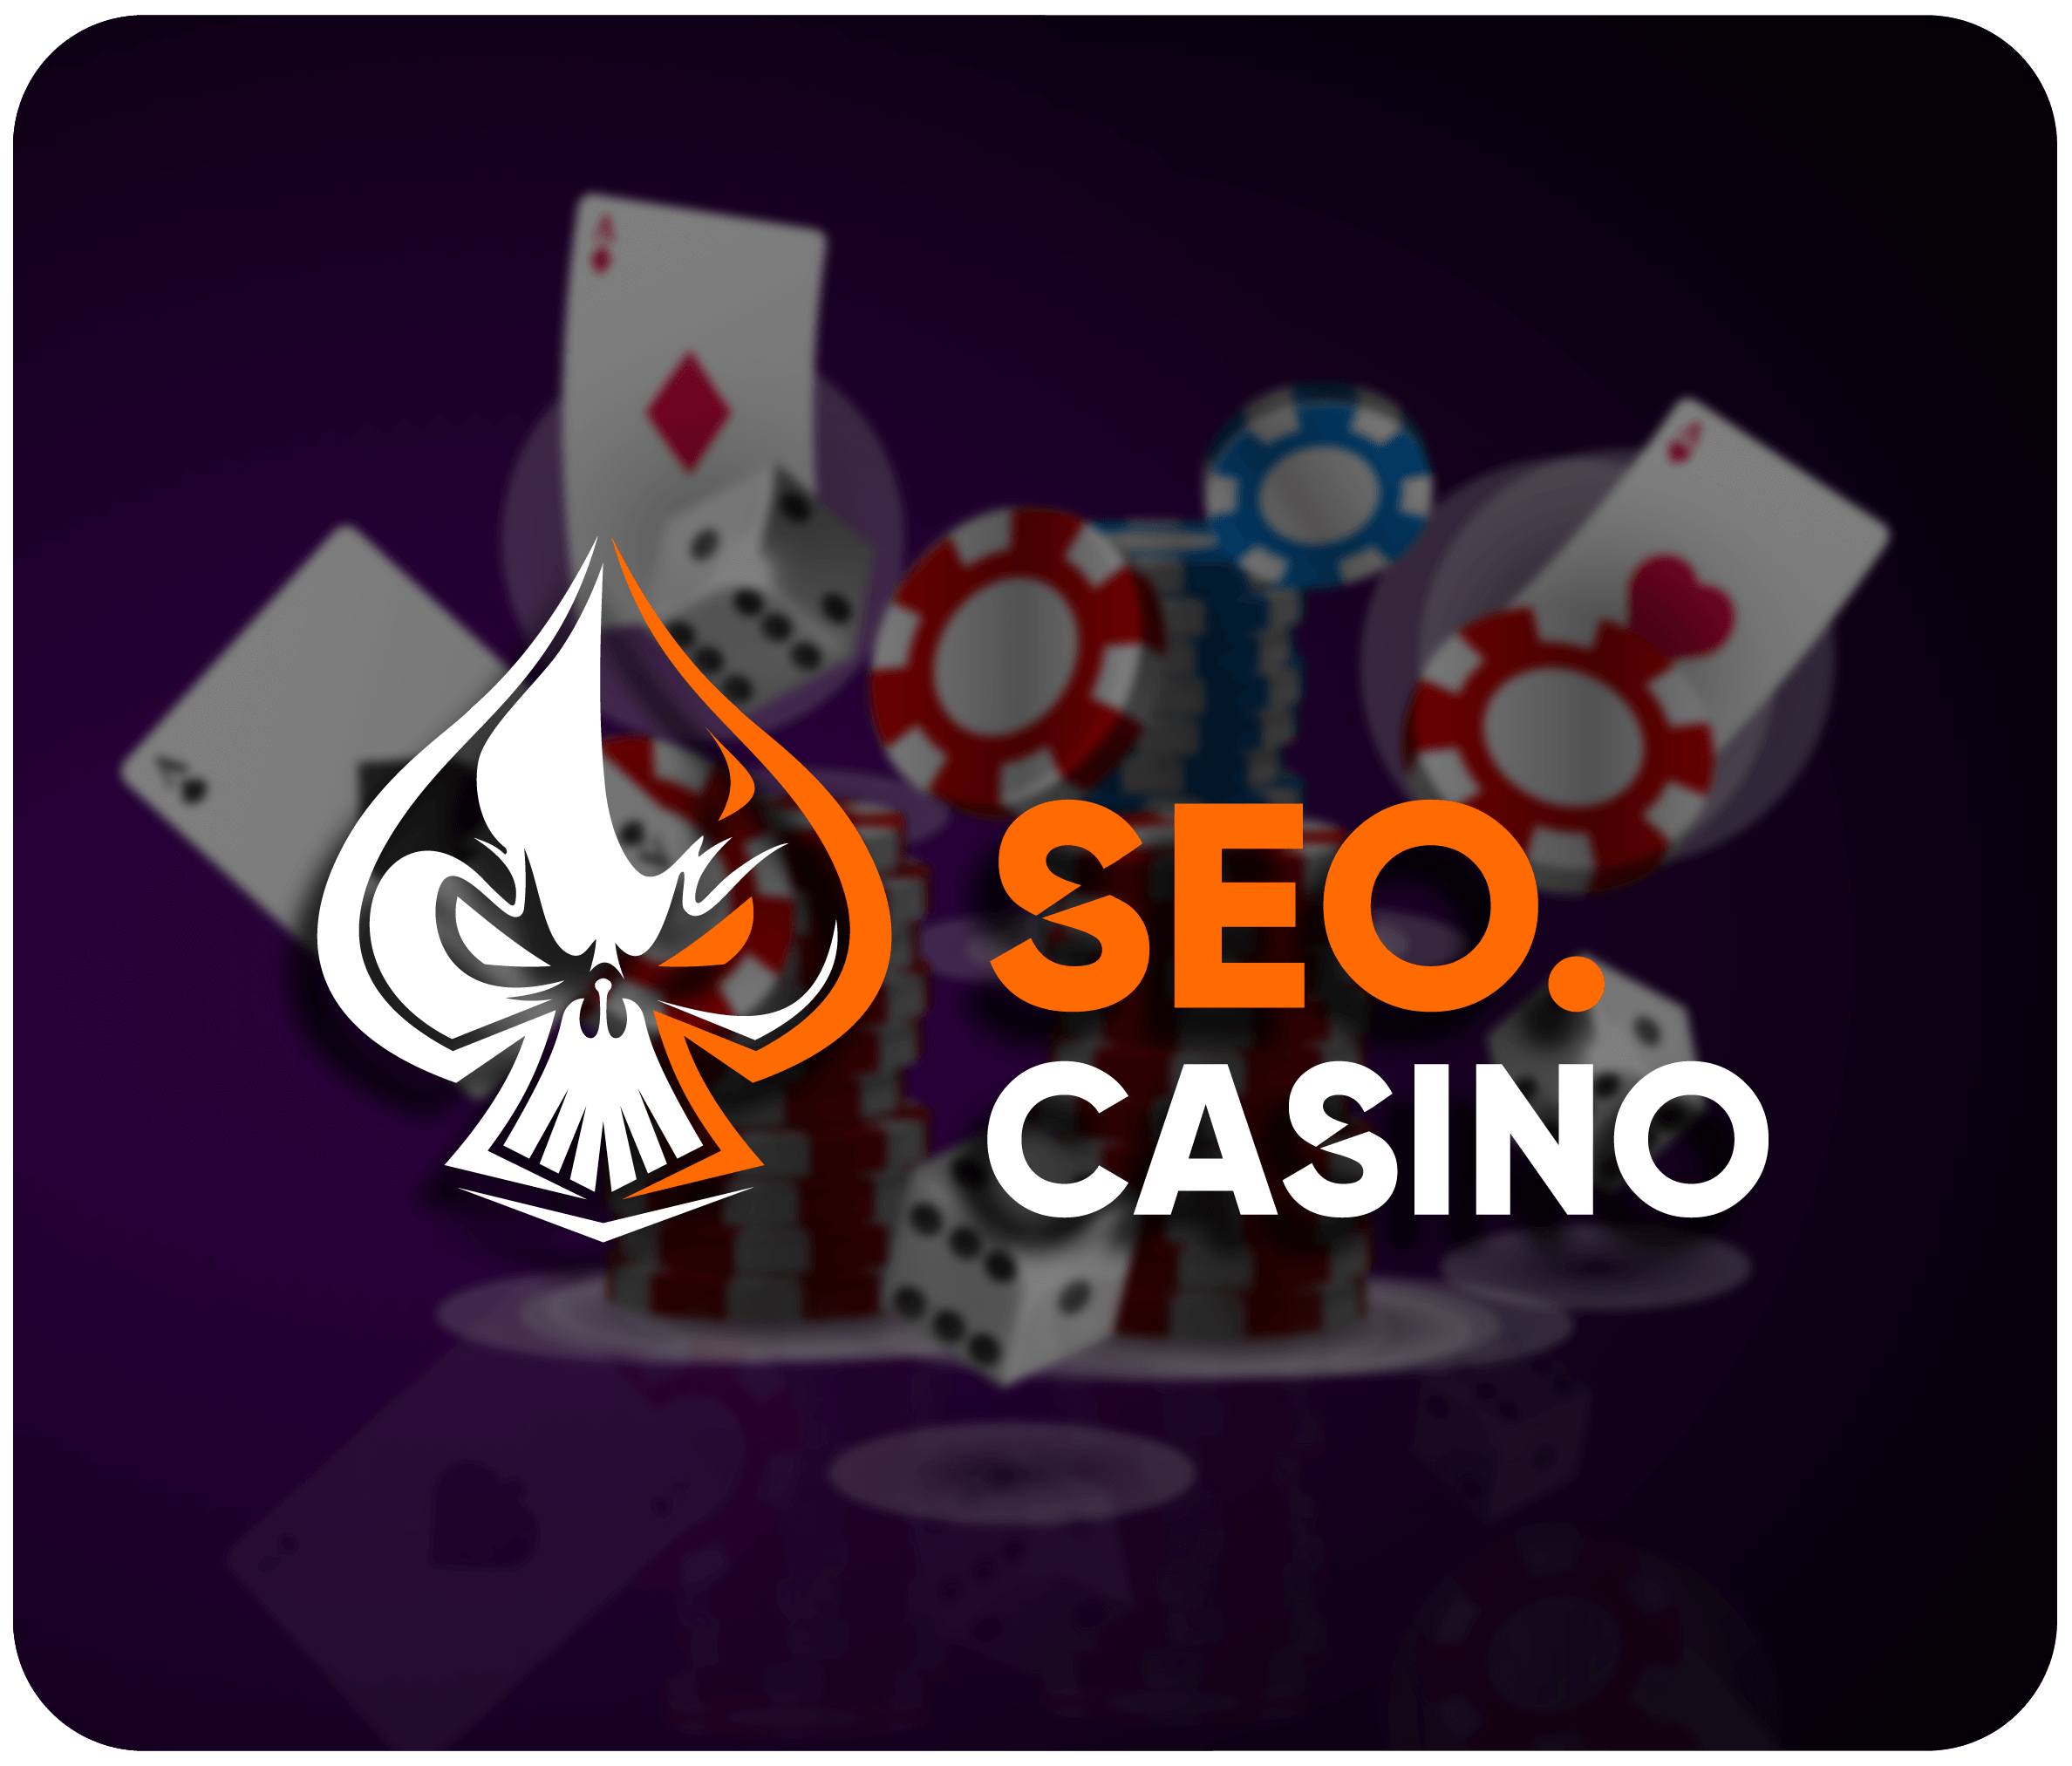 SEO services for Gambling sites